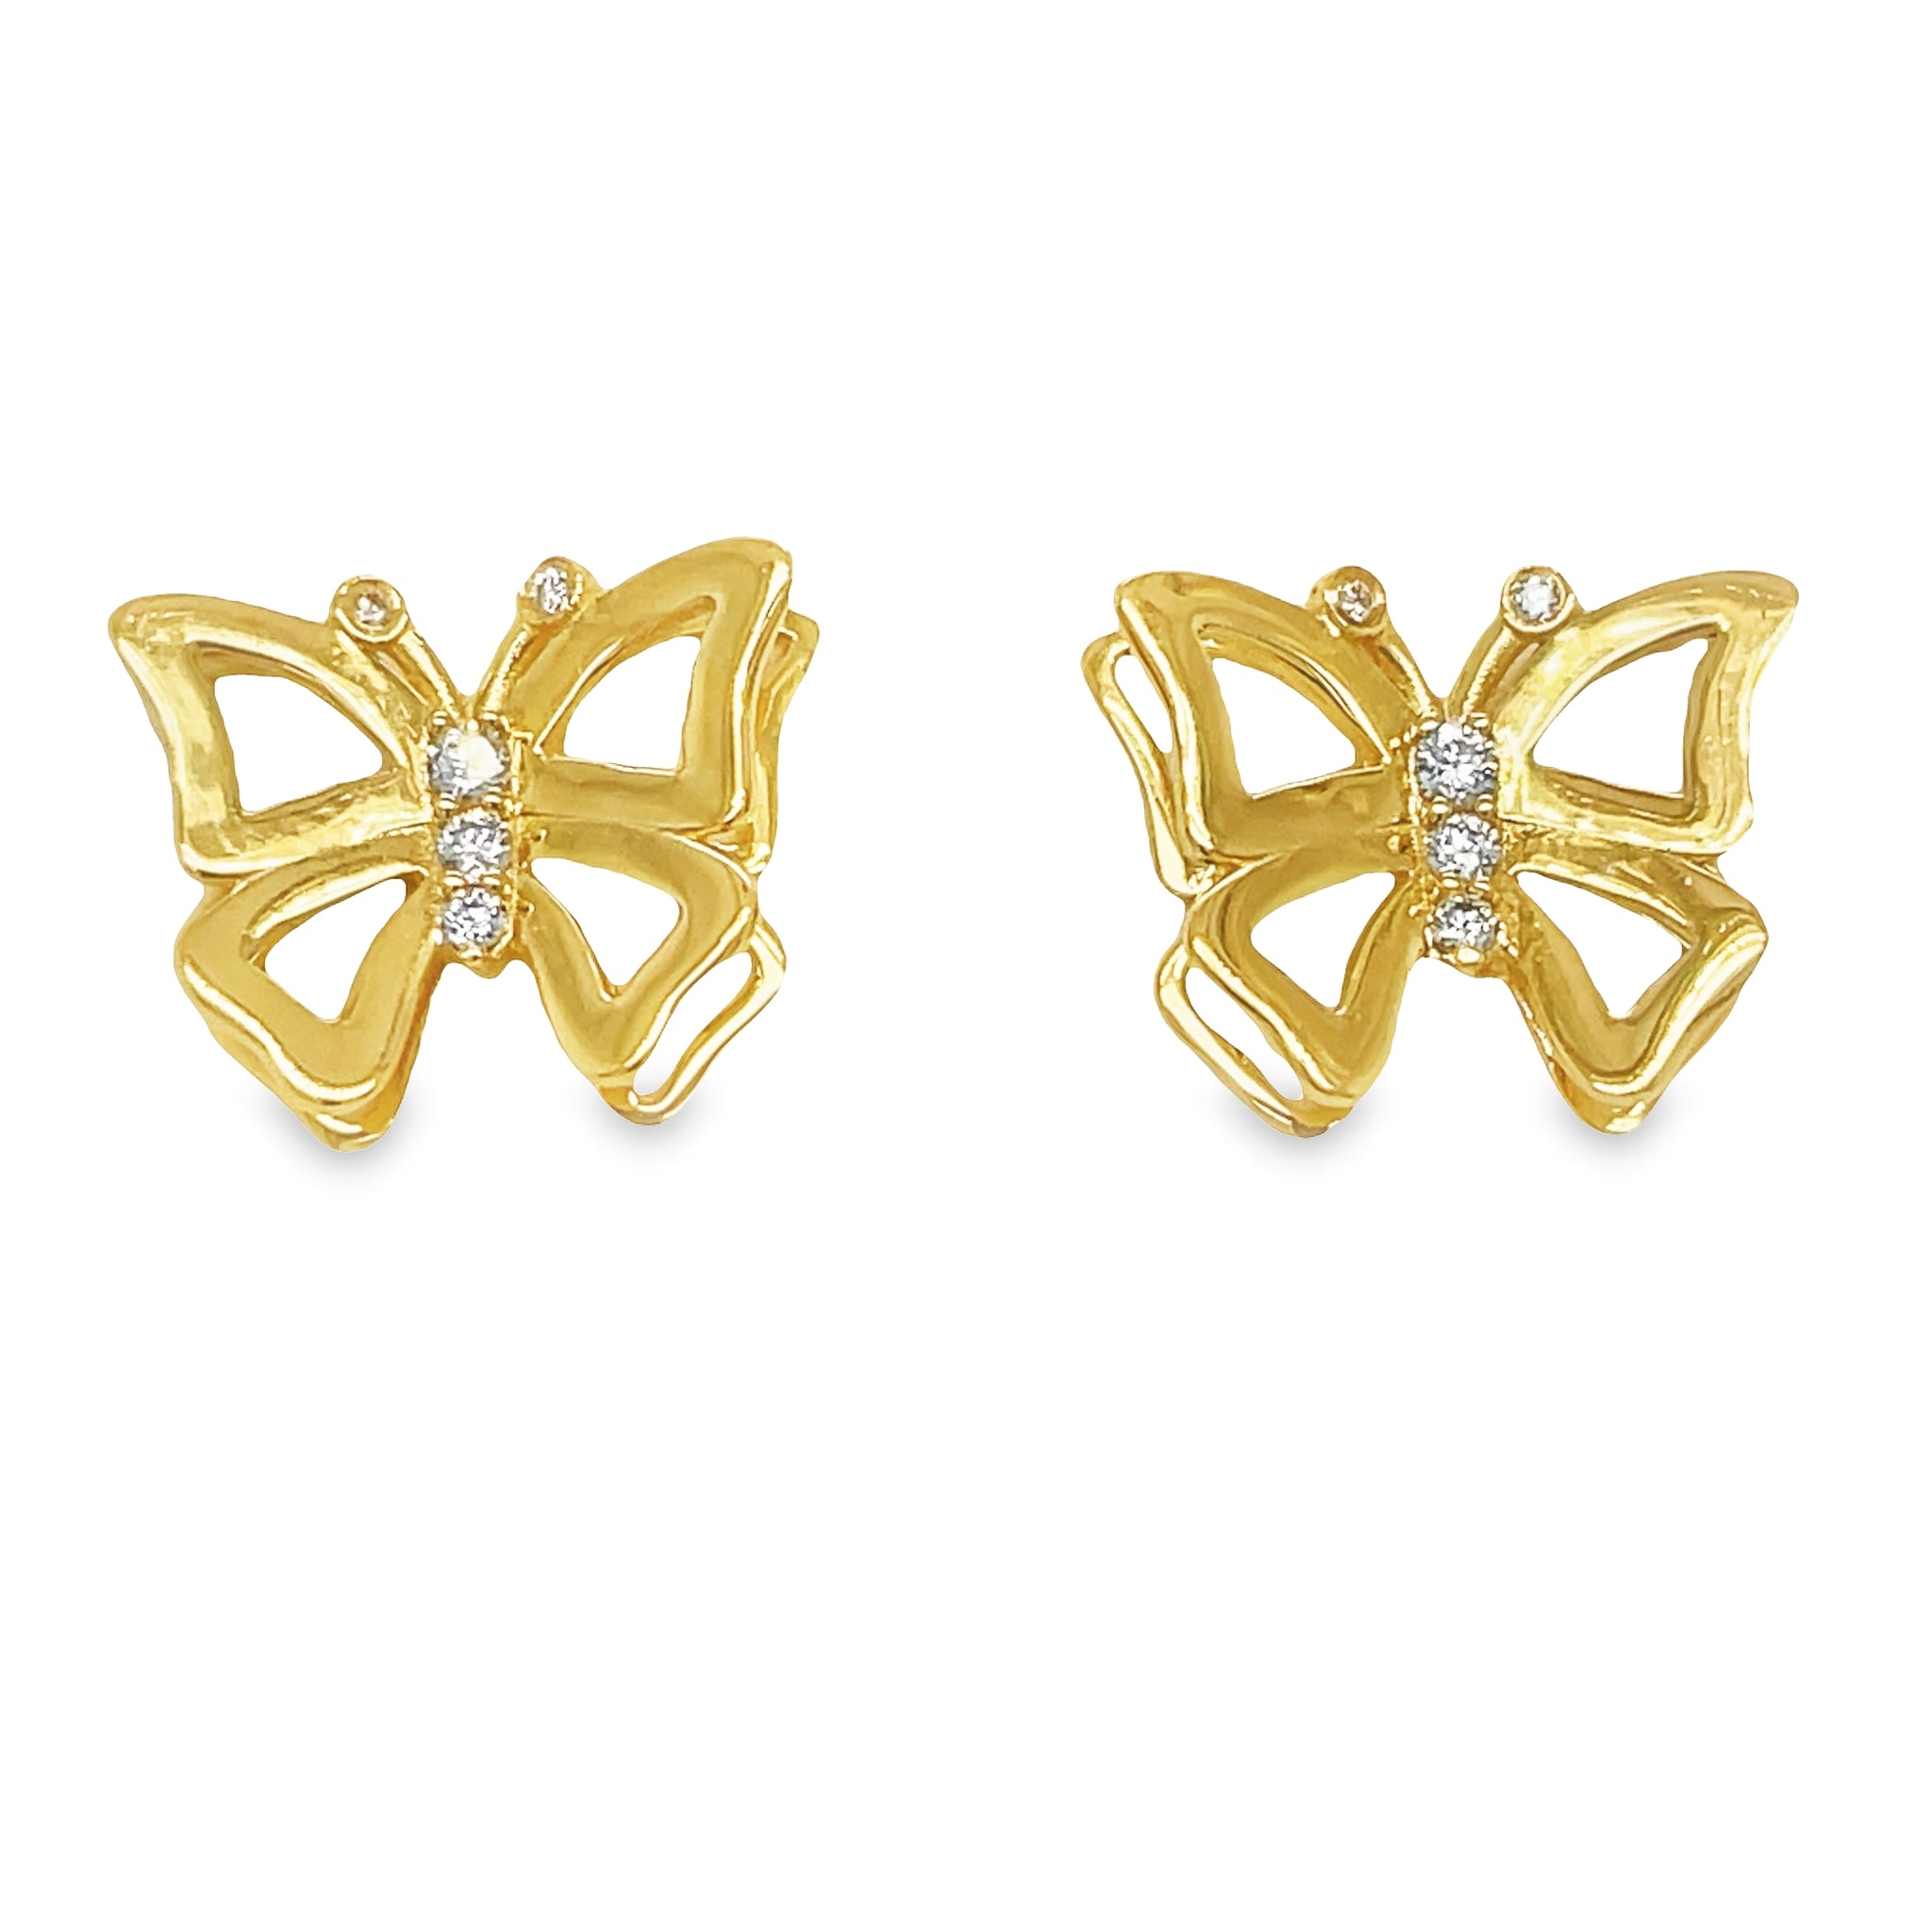 Make a sparkling statement with these beautiful and unique 18k yellow gold butterfly earrings. Hand-set with round brilliant diamonds and secured with a firm friction back, these earrings will be a stunning addition to any look. Add that special touch of glamour today!